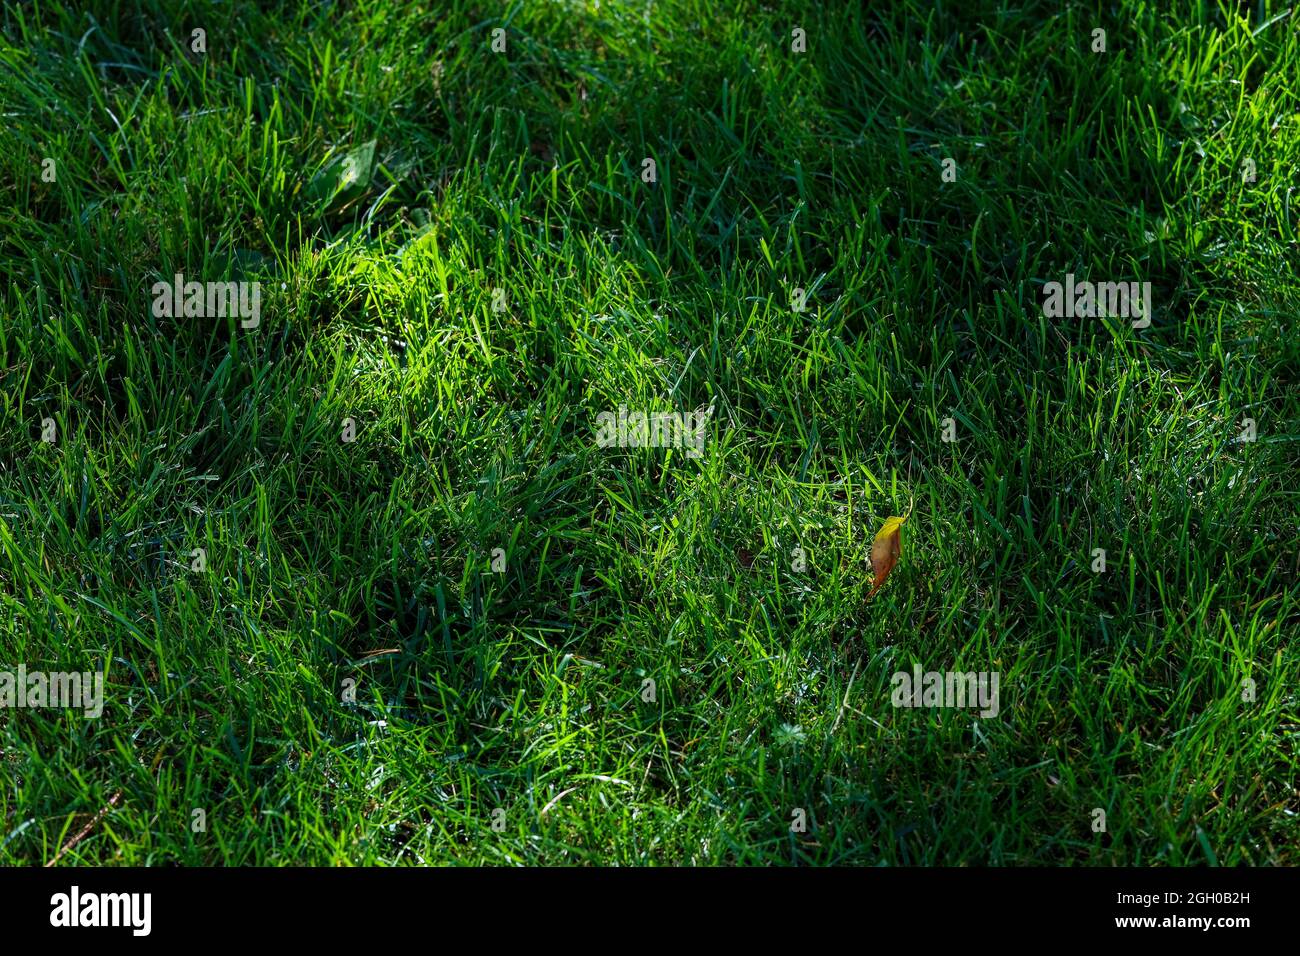 Top view of tall fluffy grass on the golf course. High quality photo Stock Photo